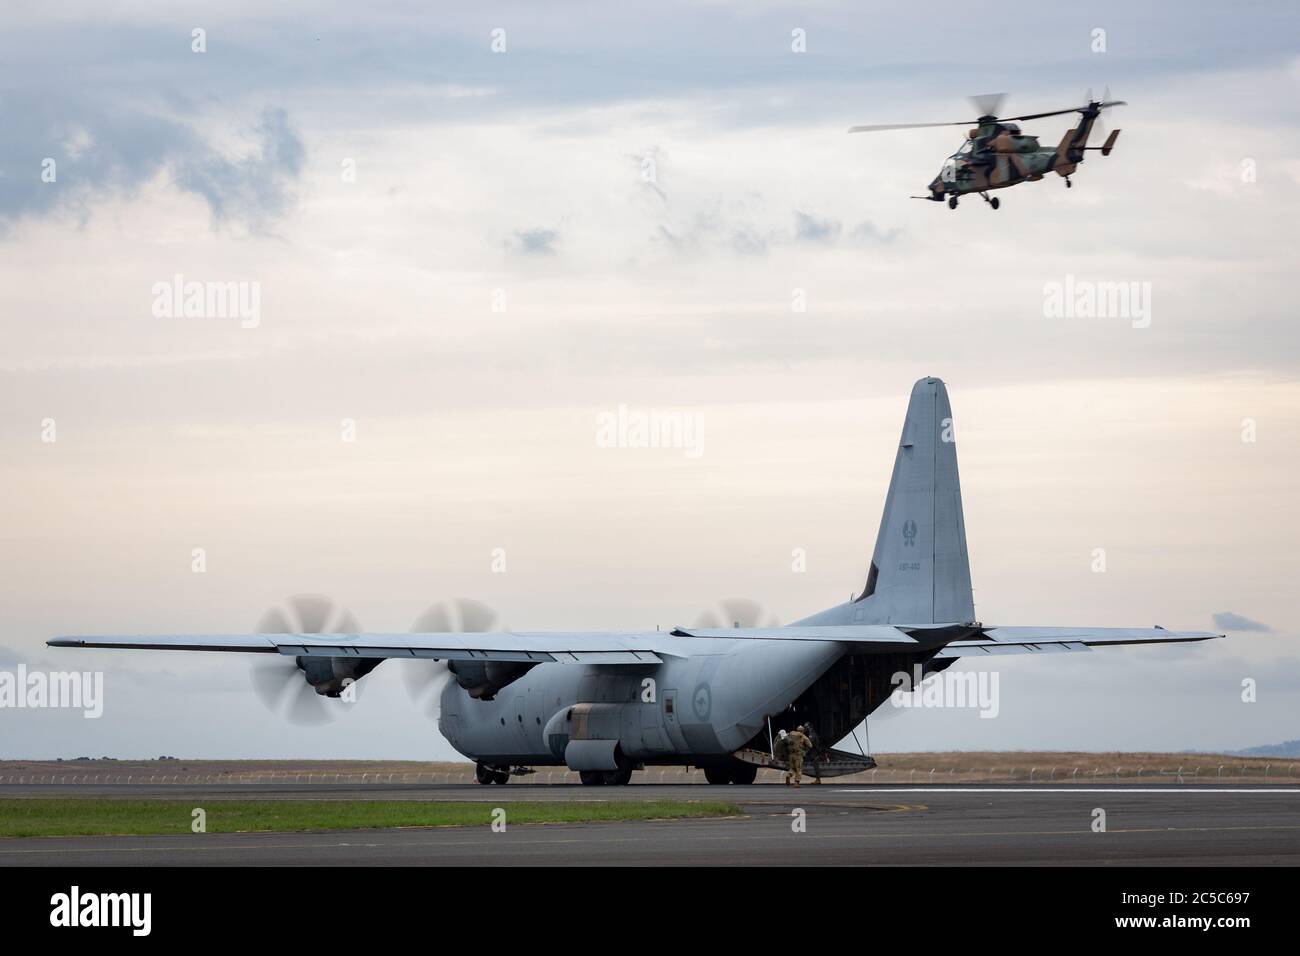 Royal Australian Air Force Lockheed Martin C-130J Hercules military cargo aircraft on the runway with an Army Eurocpter Tiger ARH helicopter flying ab Stock Photo